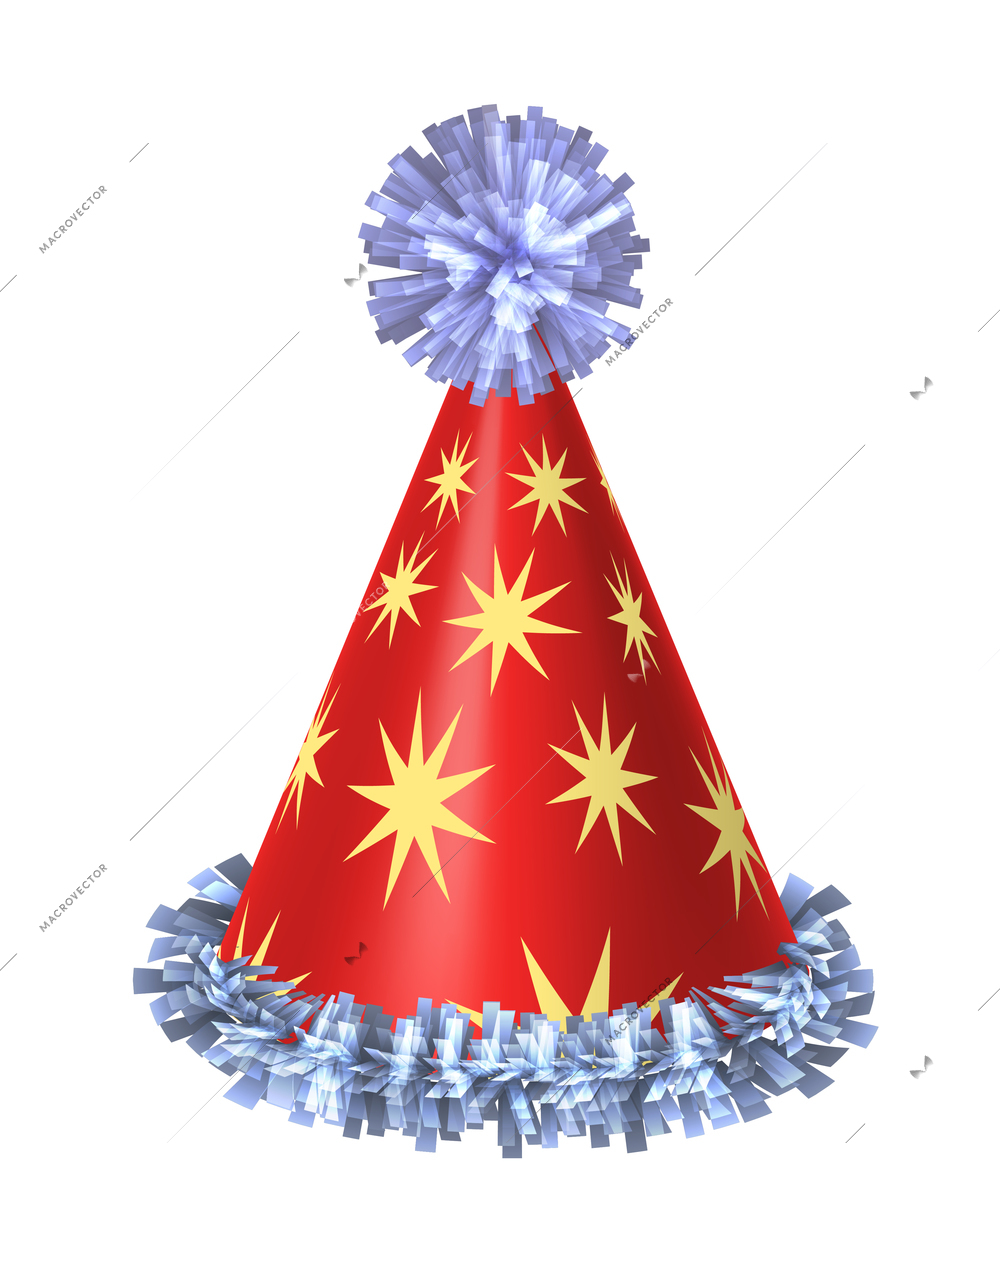 Red paper party hat with yellow stars realistic vector illustration